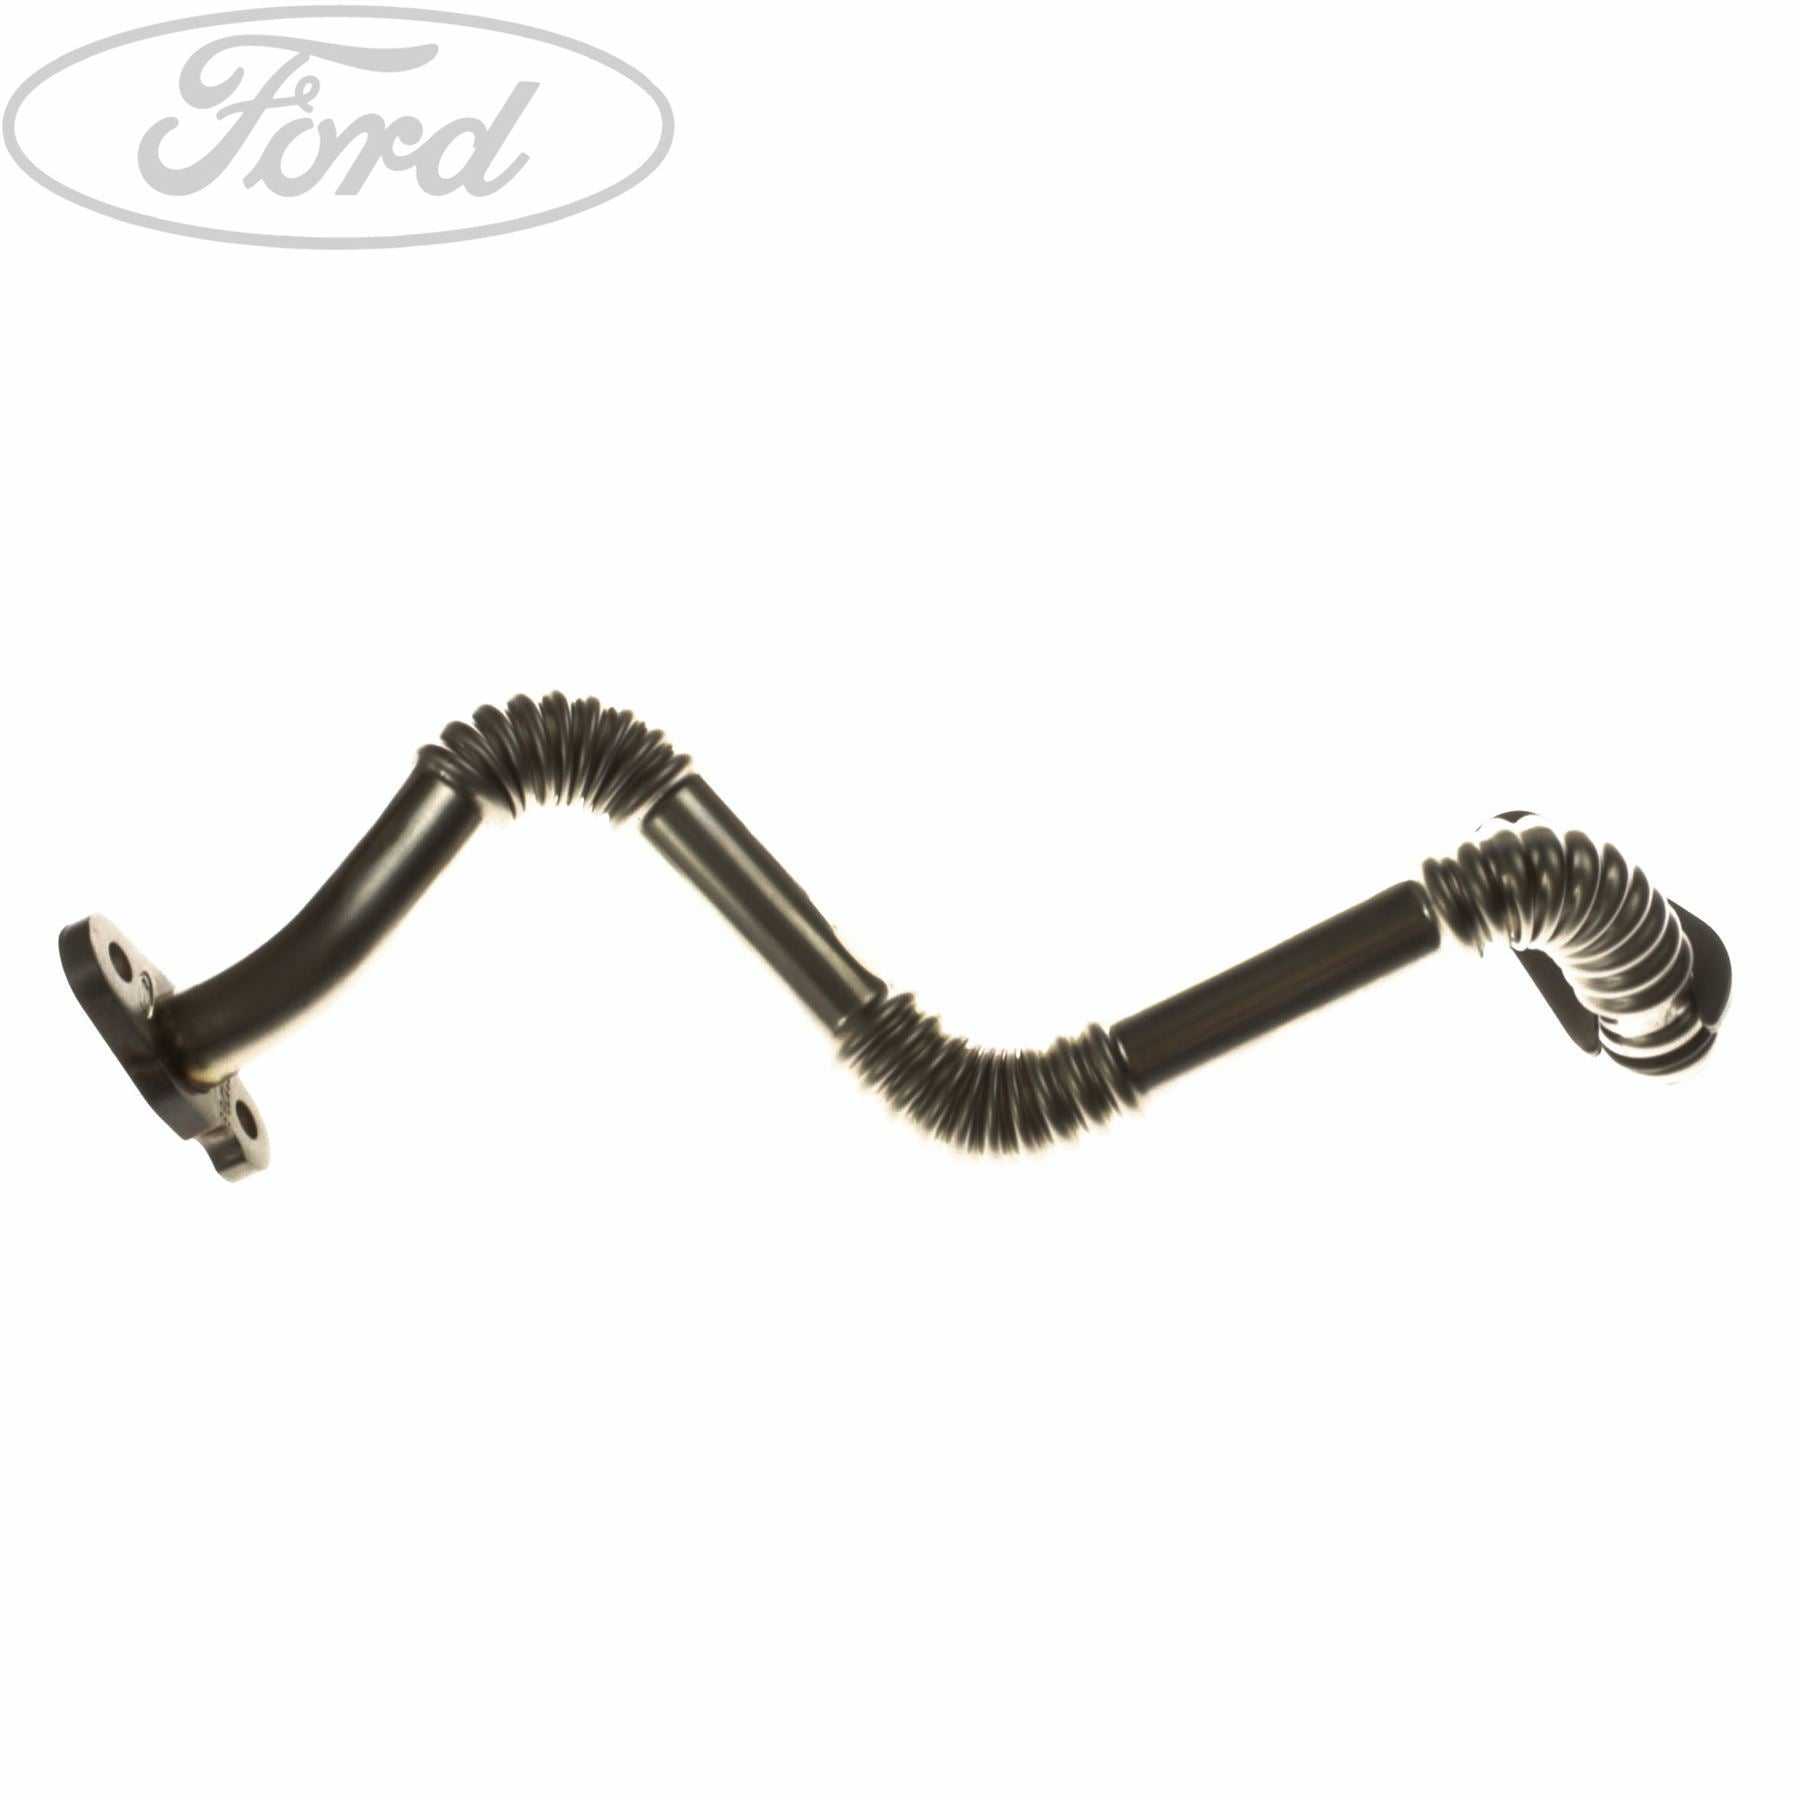 Ford, TRANSIT EXHAUST MANIFOLD OIL DRAIN TUBE